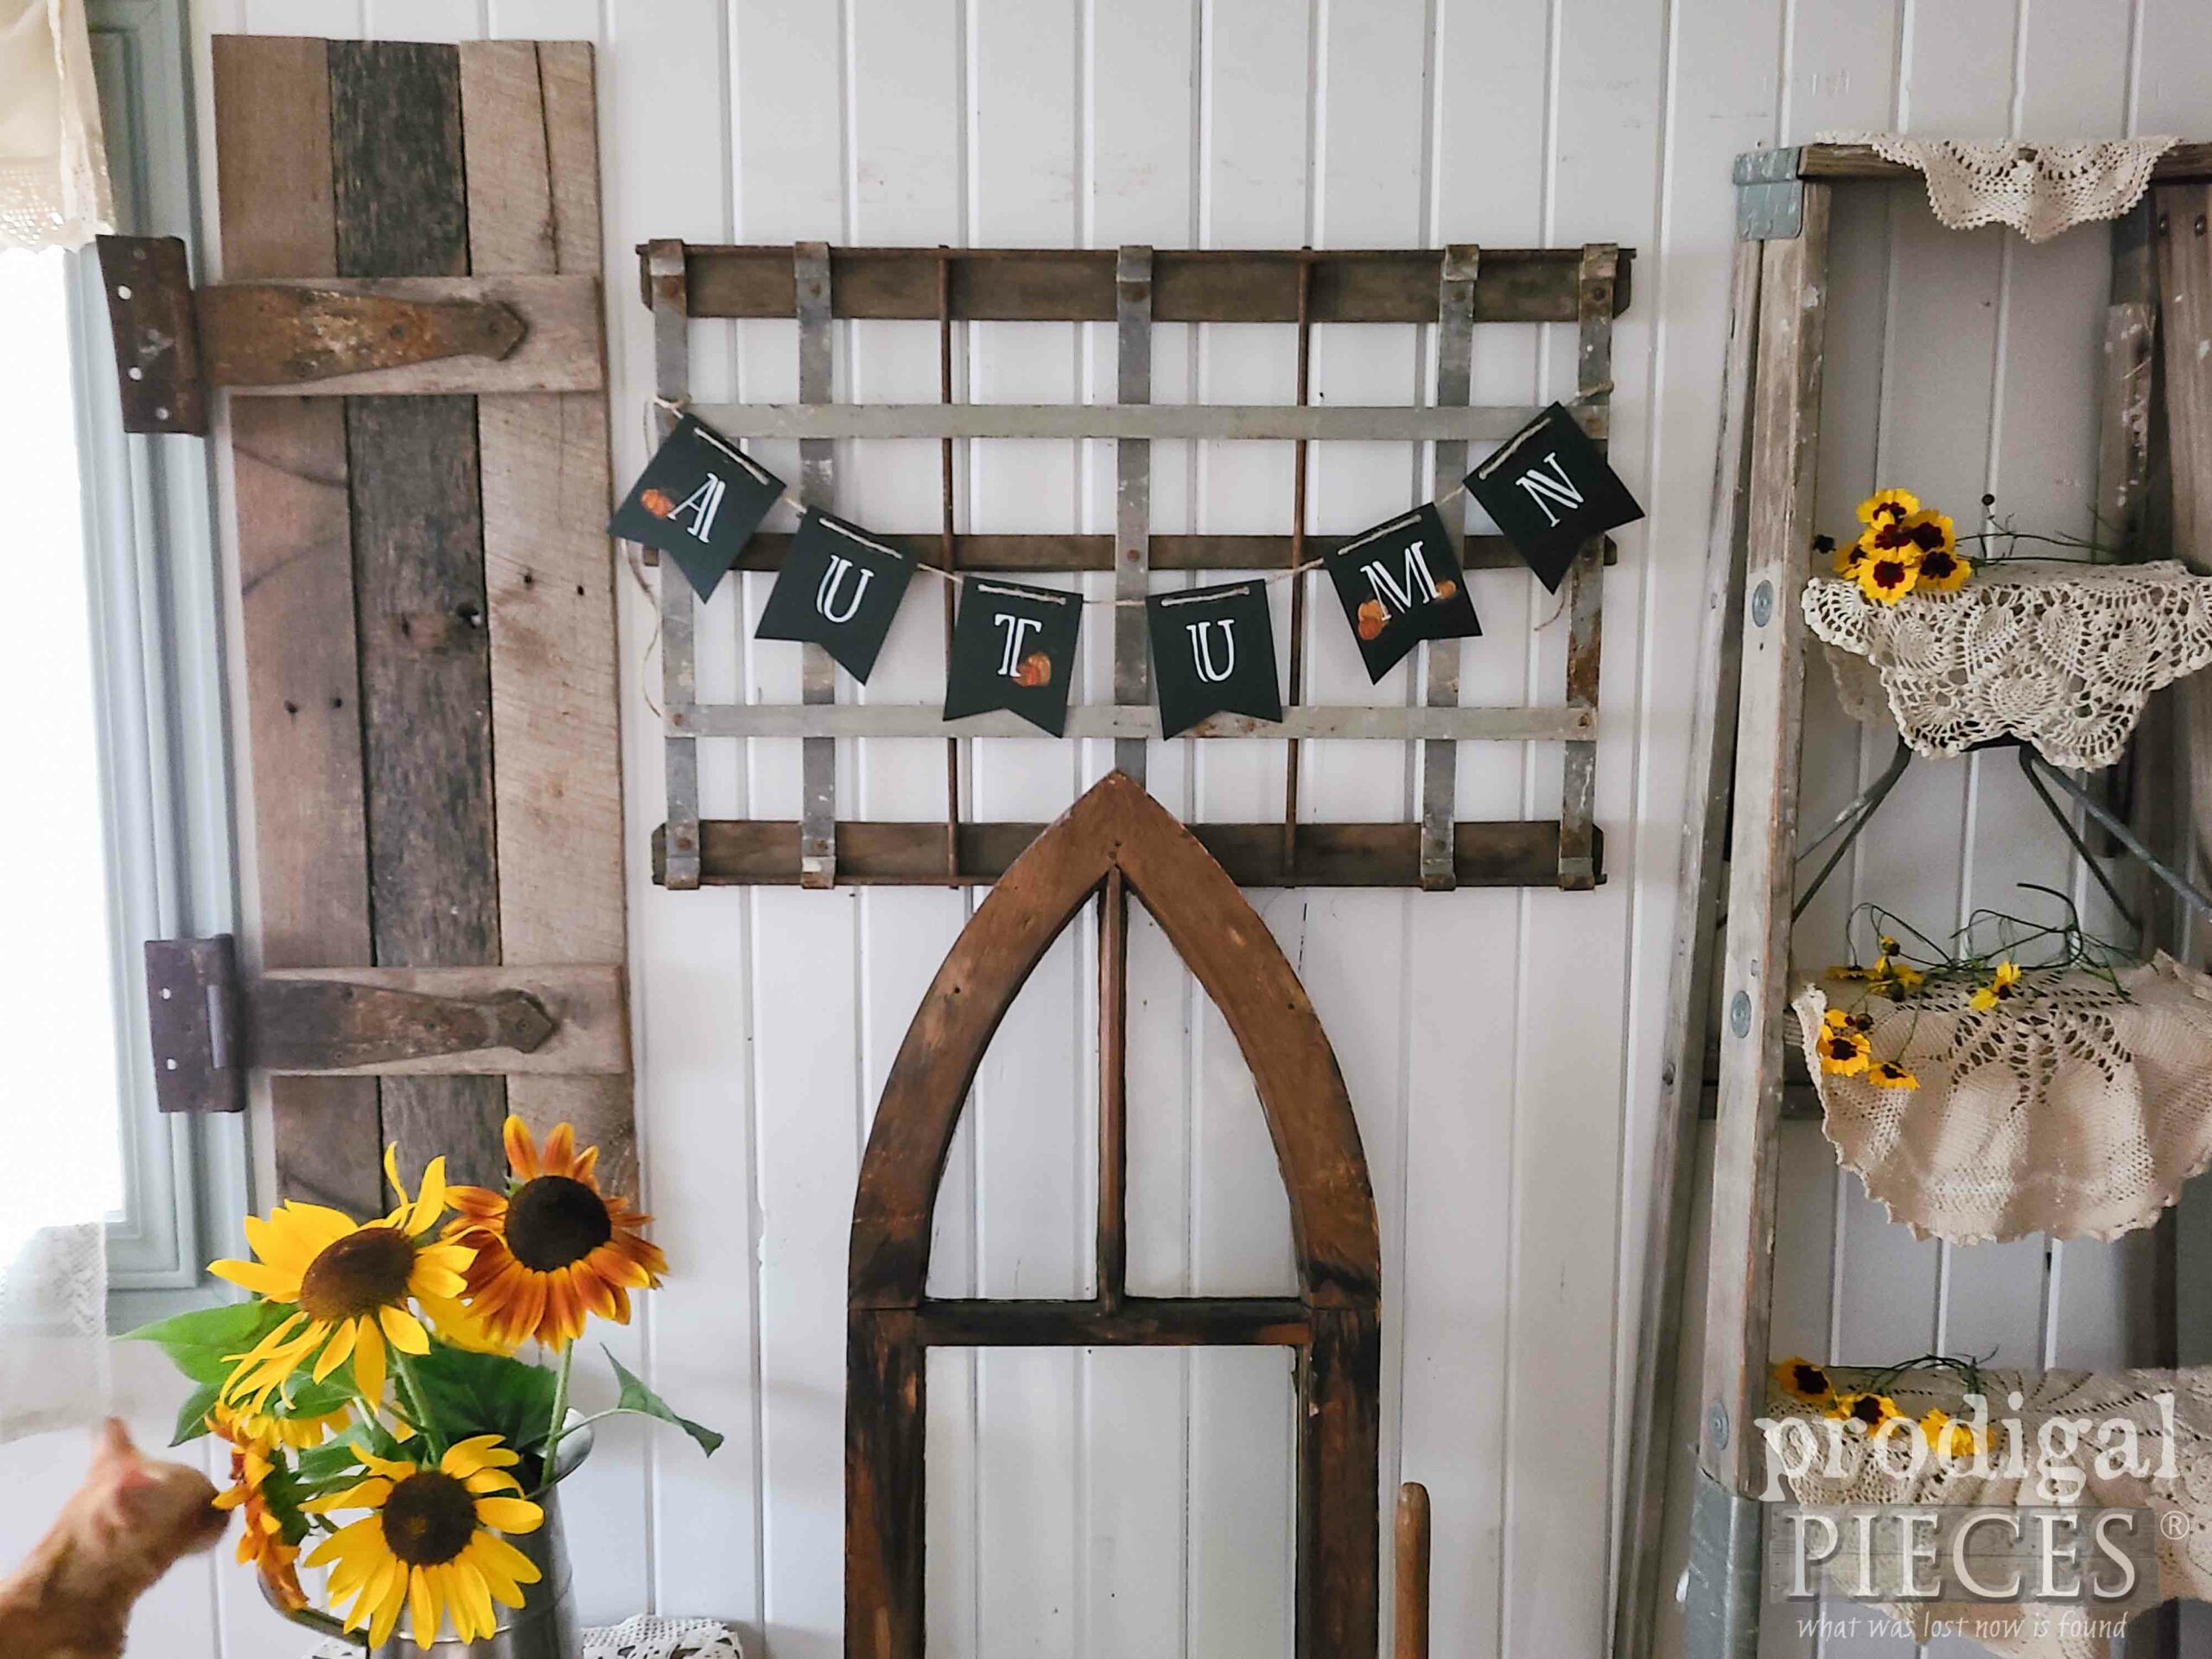 Reclaimed Farmhouse Salvaged Art for All Seasons by Larissa of Prodigal Pieces | prodigalpieces.com #prodigalpieces